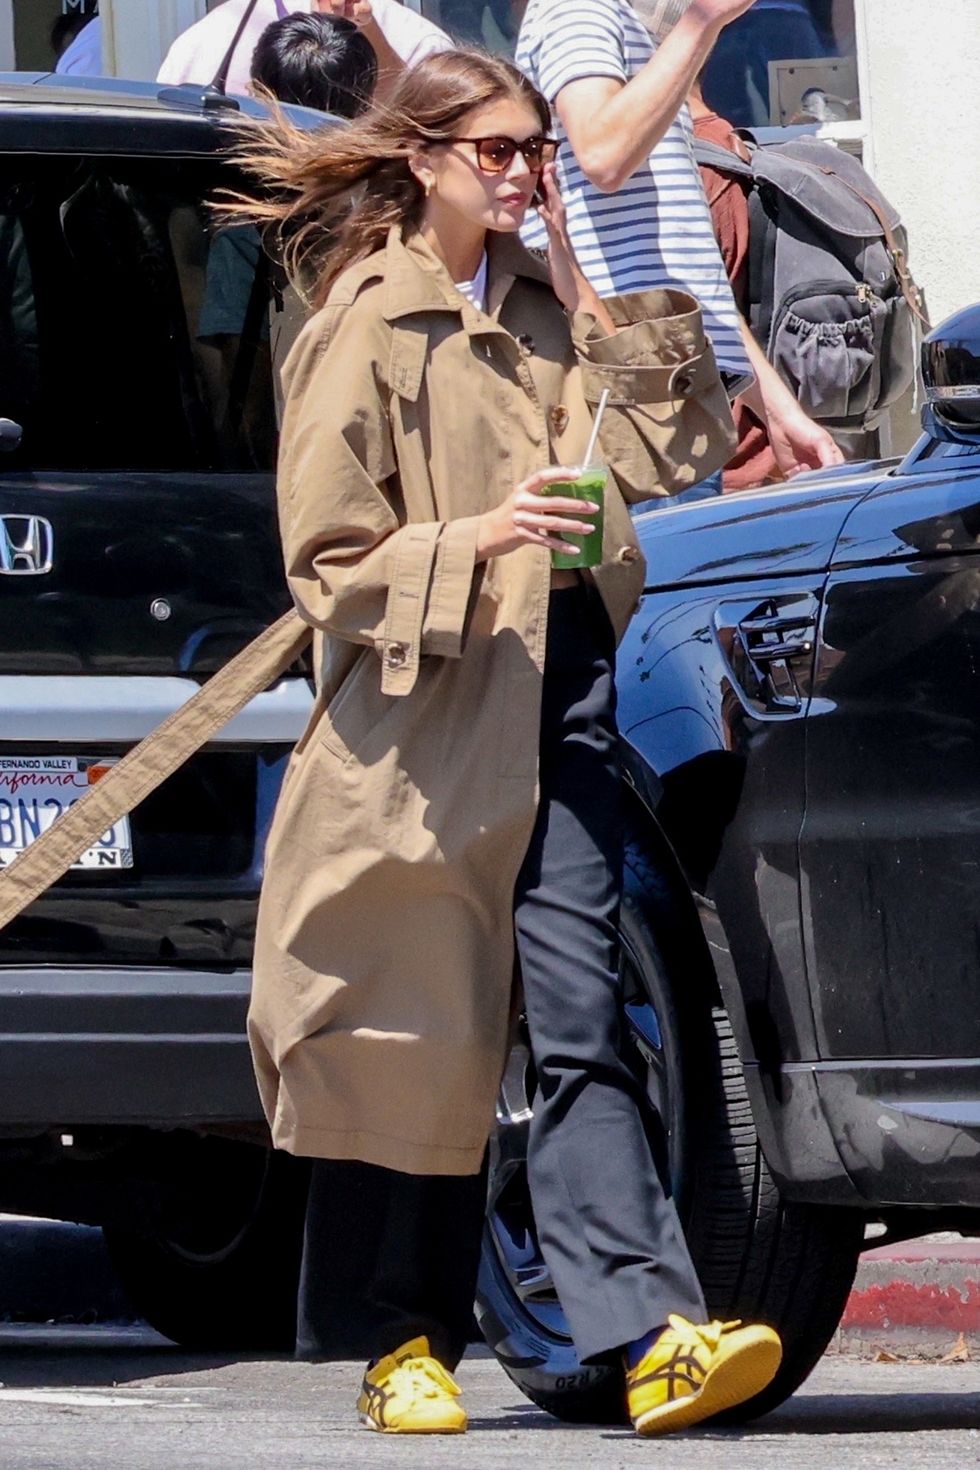 los feliz, ca exclusive model kaia gerber rocks a huge tan trench coat while stopping to get a green juice smoothie in los felizpictured kaia gerberbackgrid usa 6 may 2023 usa 1 310 798 9111 usasalesbackgridcomuk 44 208 344 2007 uksalesbackgridcomuk clients pictures containing childrenplease pixelate face prior to publication